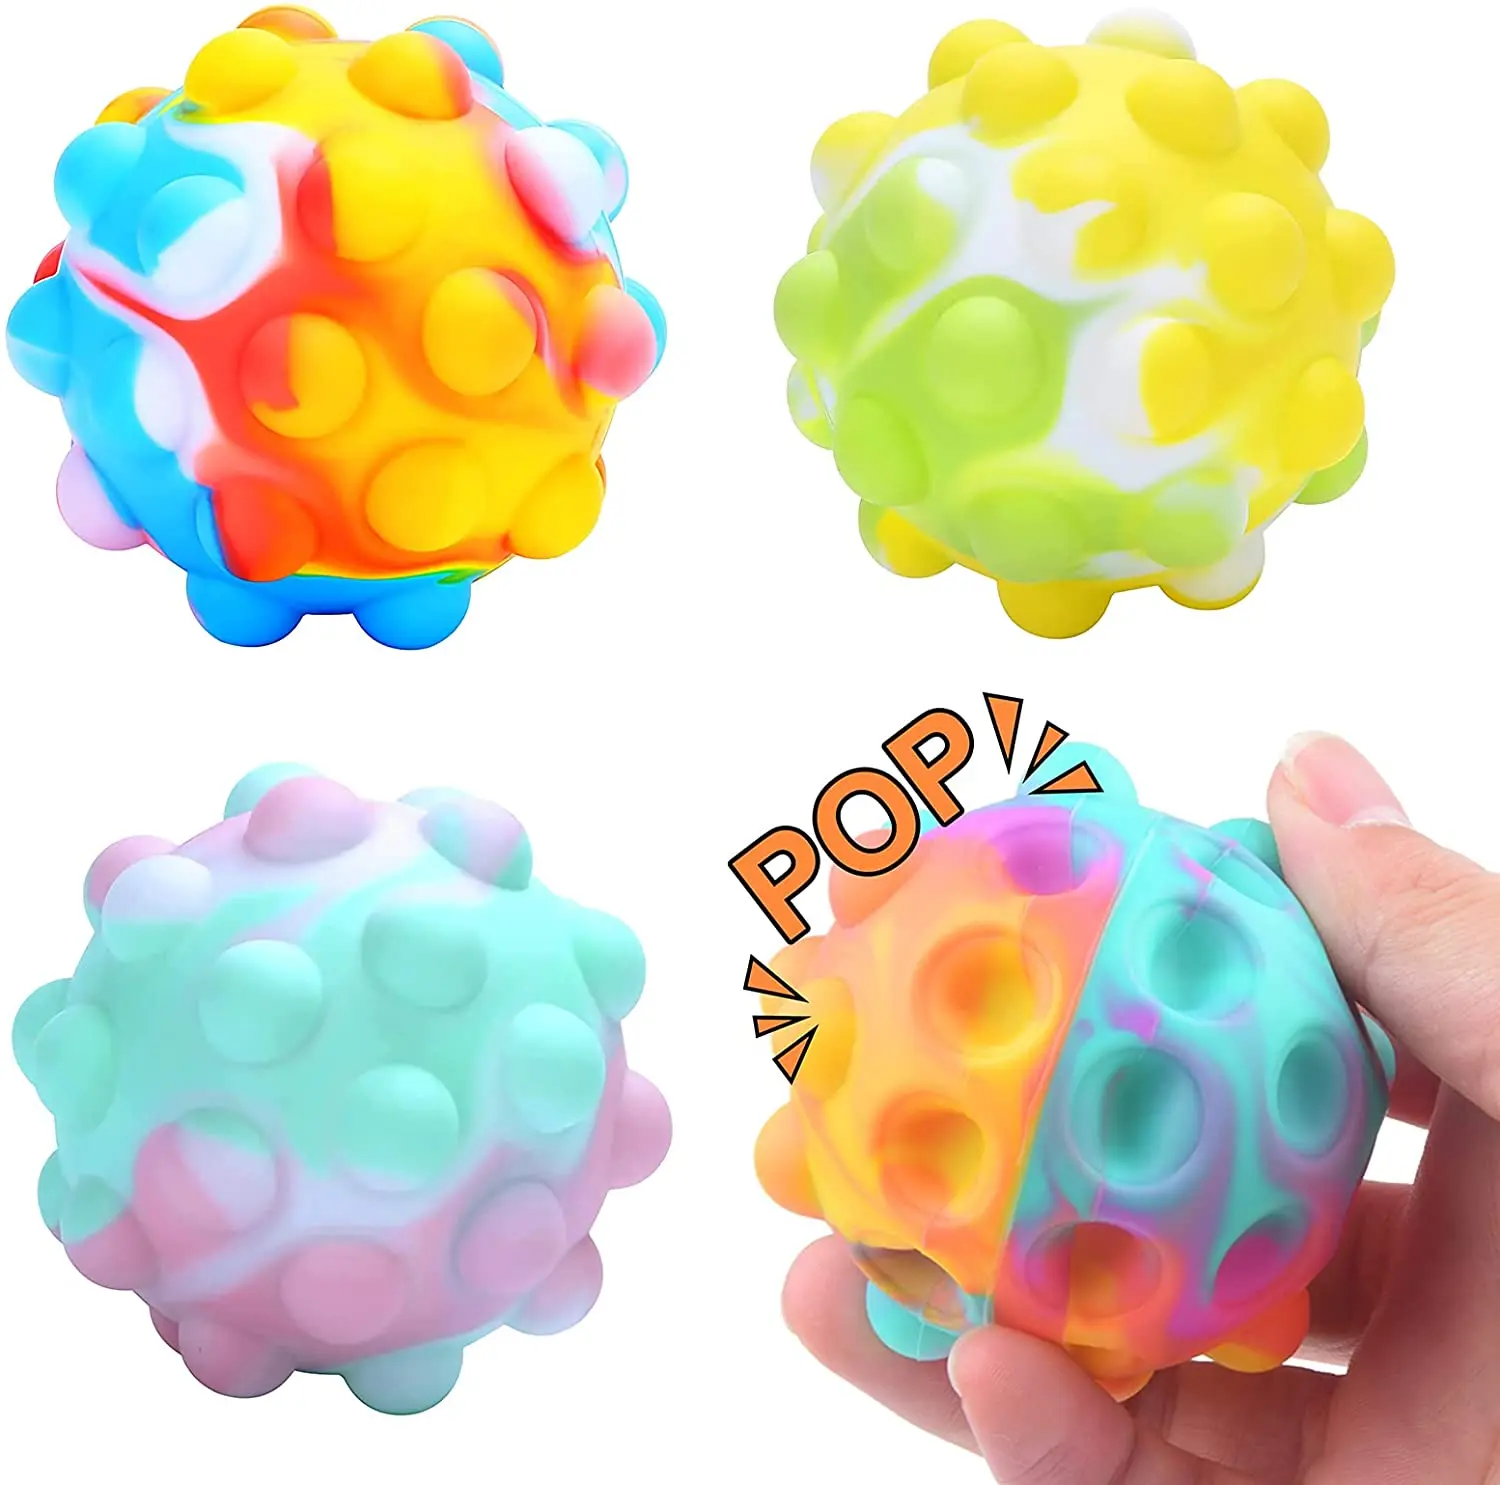 3D Pop It Ball Fidget Toy, Colorful Anti Anxiety Stress Balls for Children  and Kids, Squishy Sensory Push Popper Ball Toys, 4 Pack - Channies